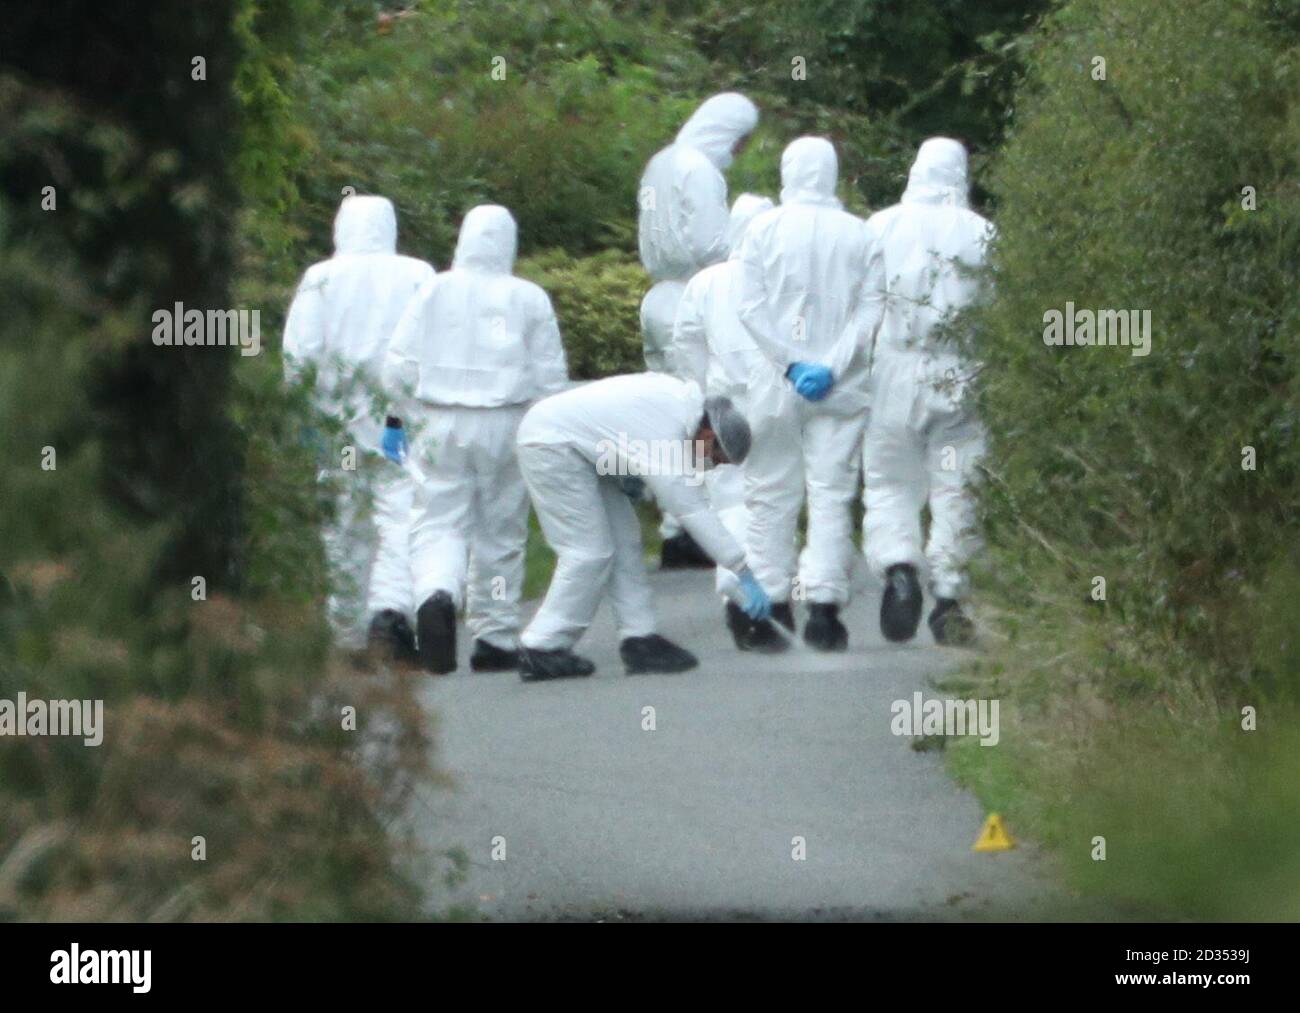 Forensic teams working along Lambdens Hill, near the scene where Thames Valley Police officer Pc Andrew Harper, 28, died following a 'serious incident' at about 11.30pm on Thursday near the A4 Bath Road, between Reading and Newbury, at the village of Sulhamstead in Berkshire. Stock Photo